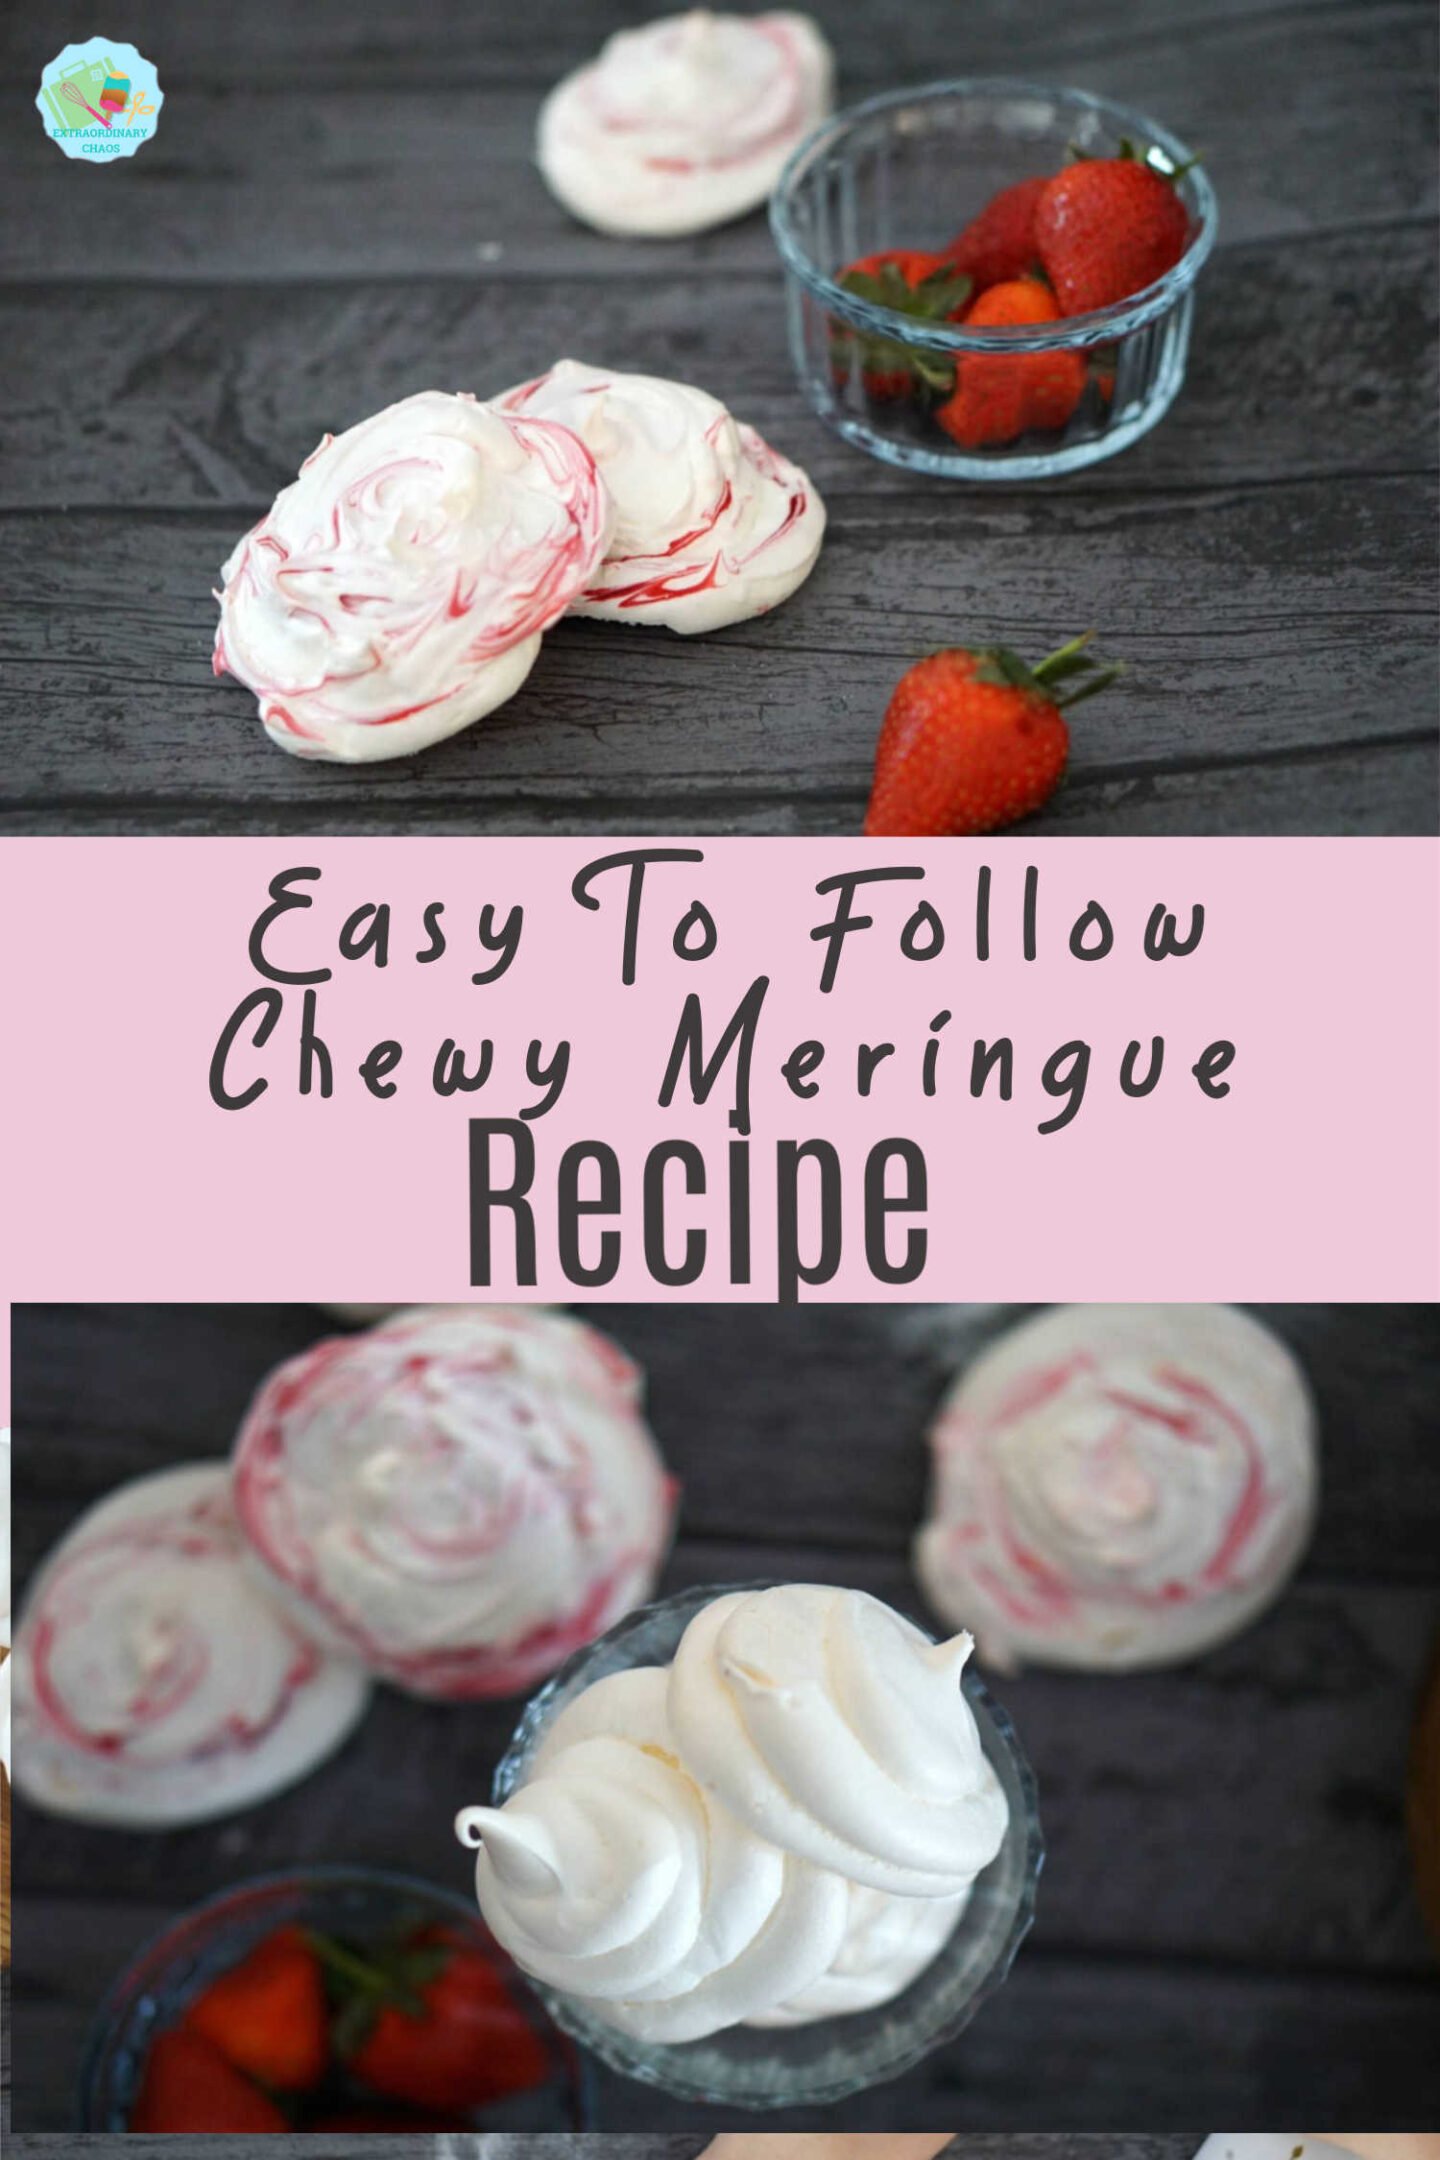 Easy to follow Chewy Meringue recipe to get perfect Meringues